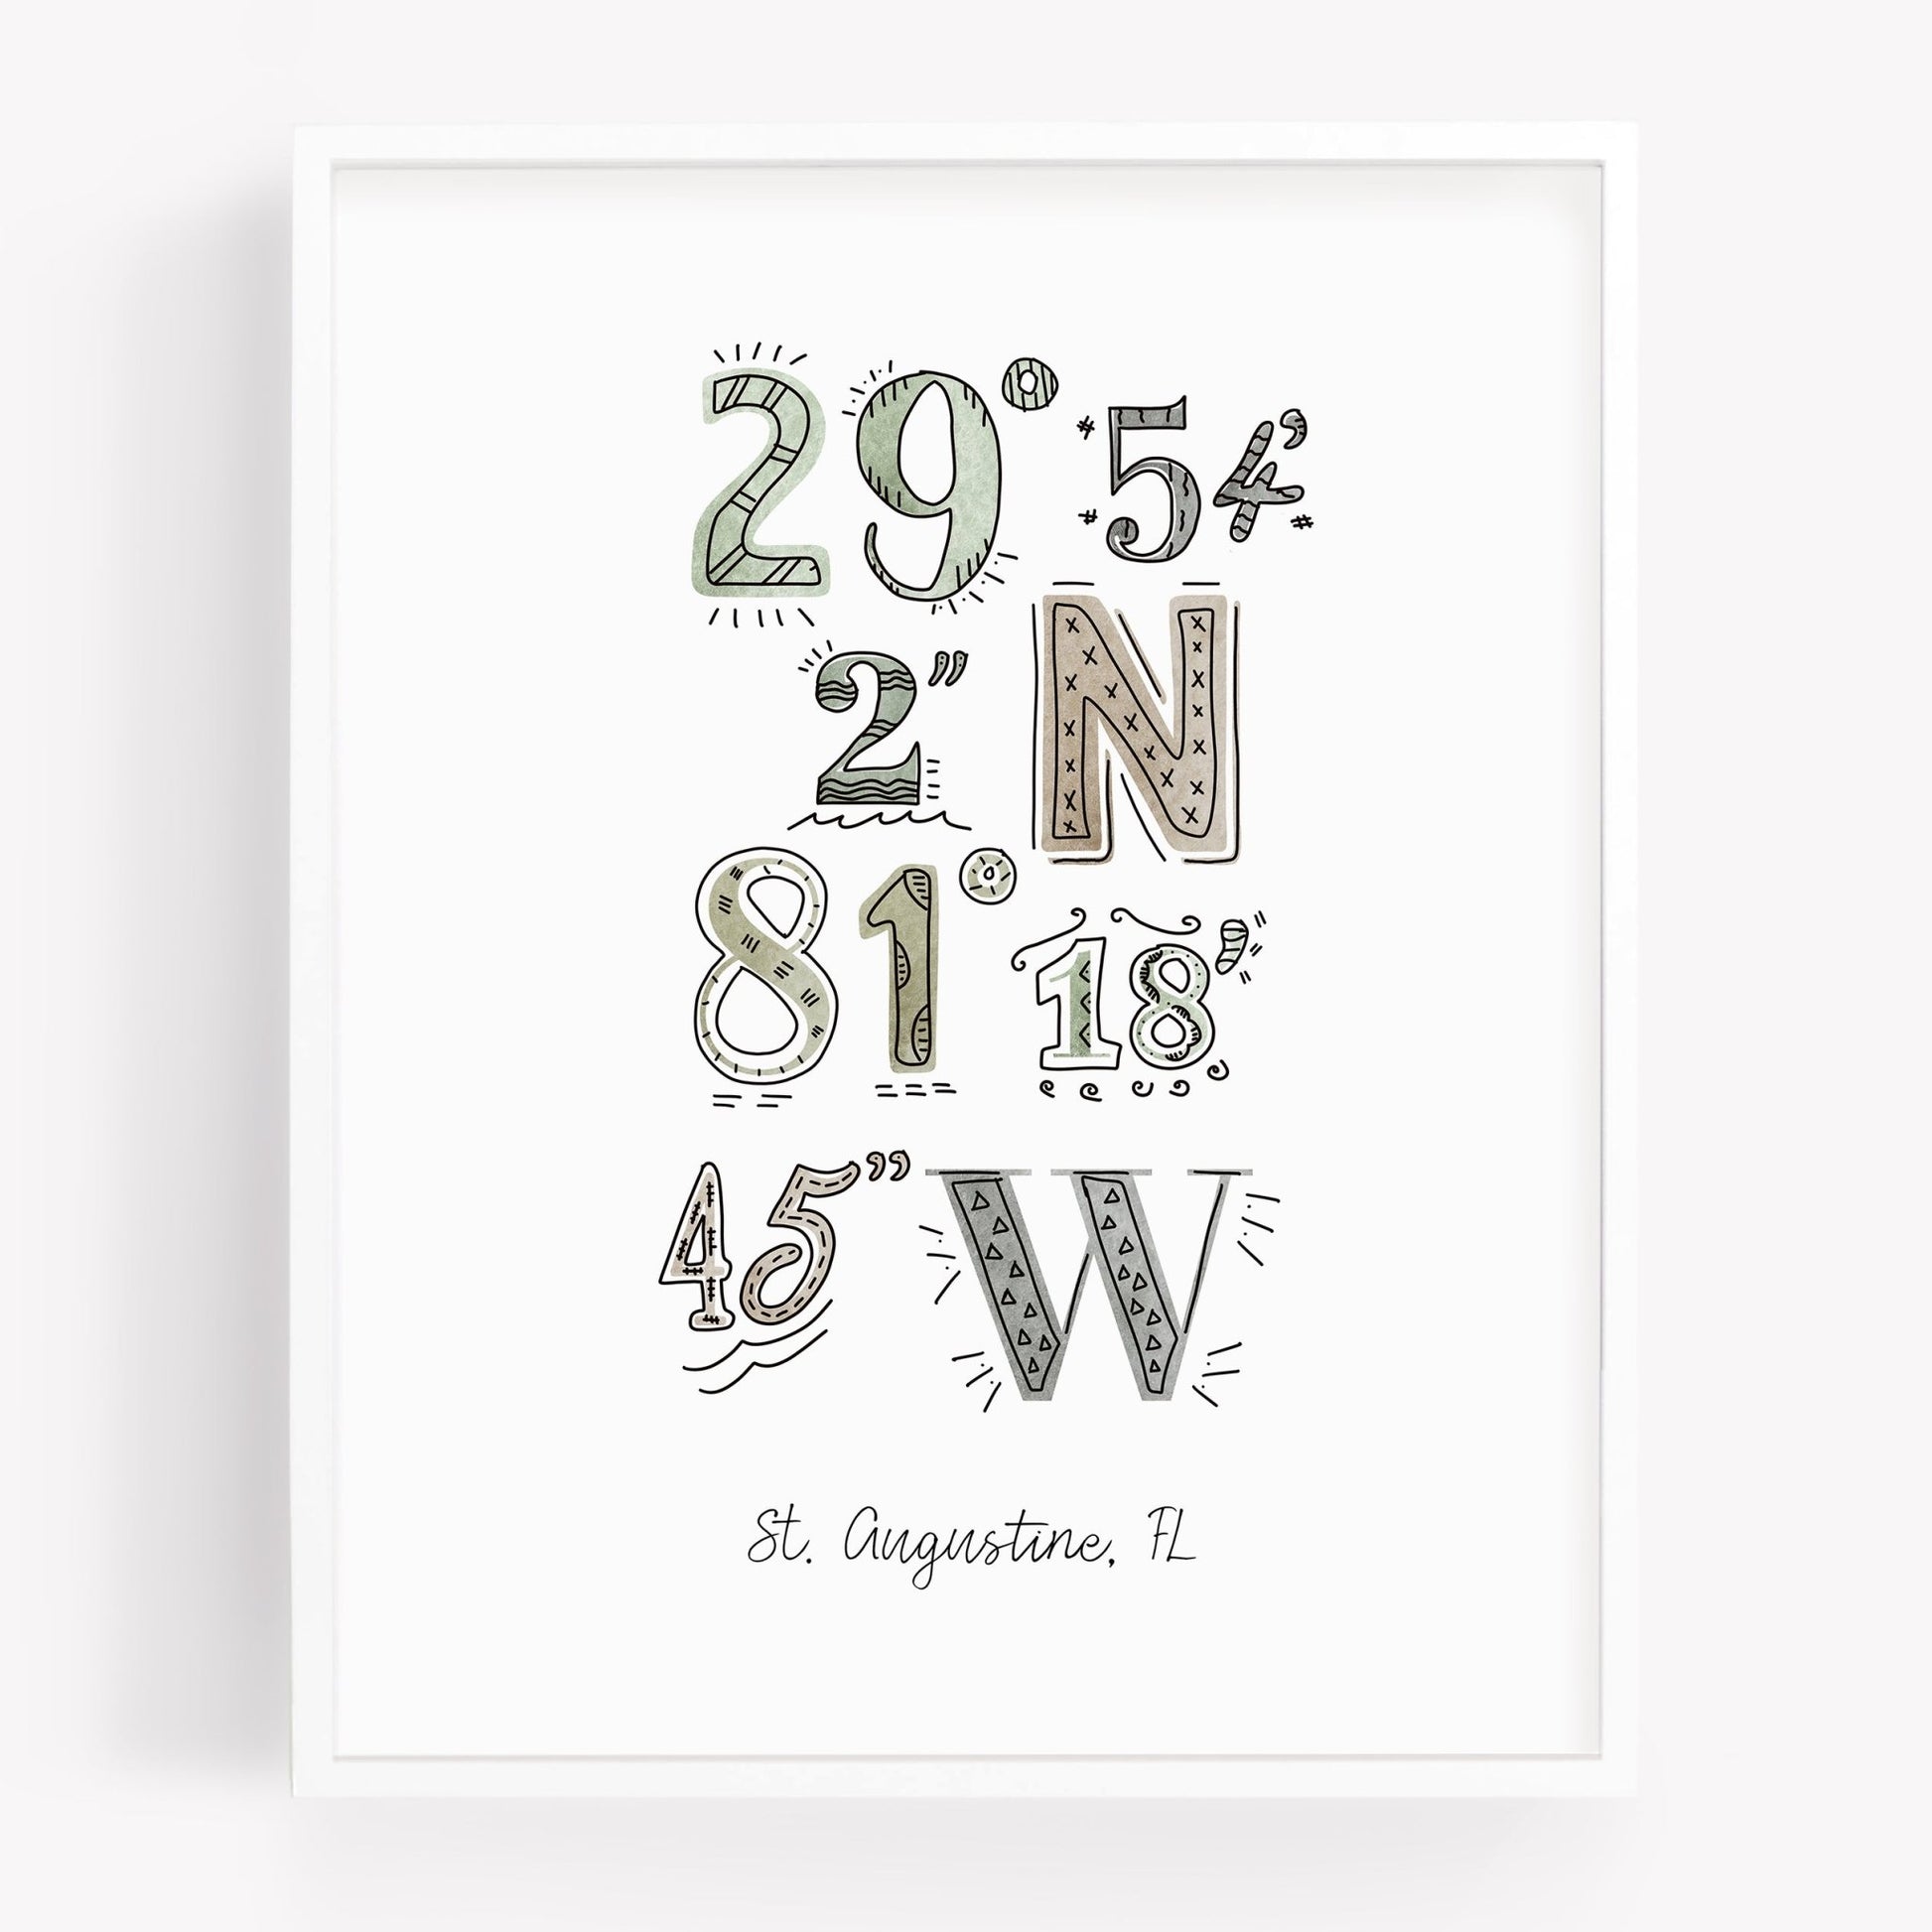 A city art print of a drawing of the coordinates of St. Augustine FL - Sparks House Co